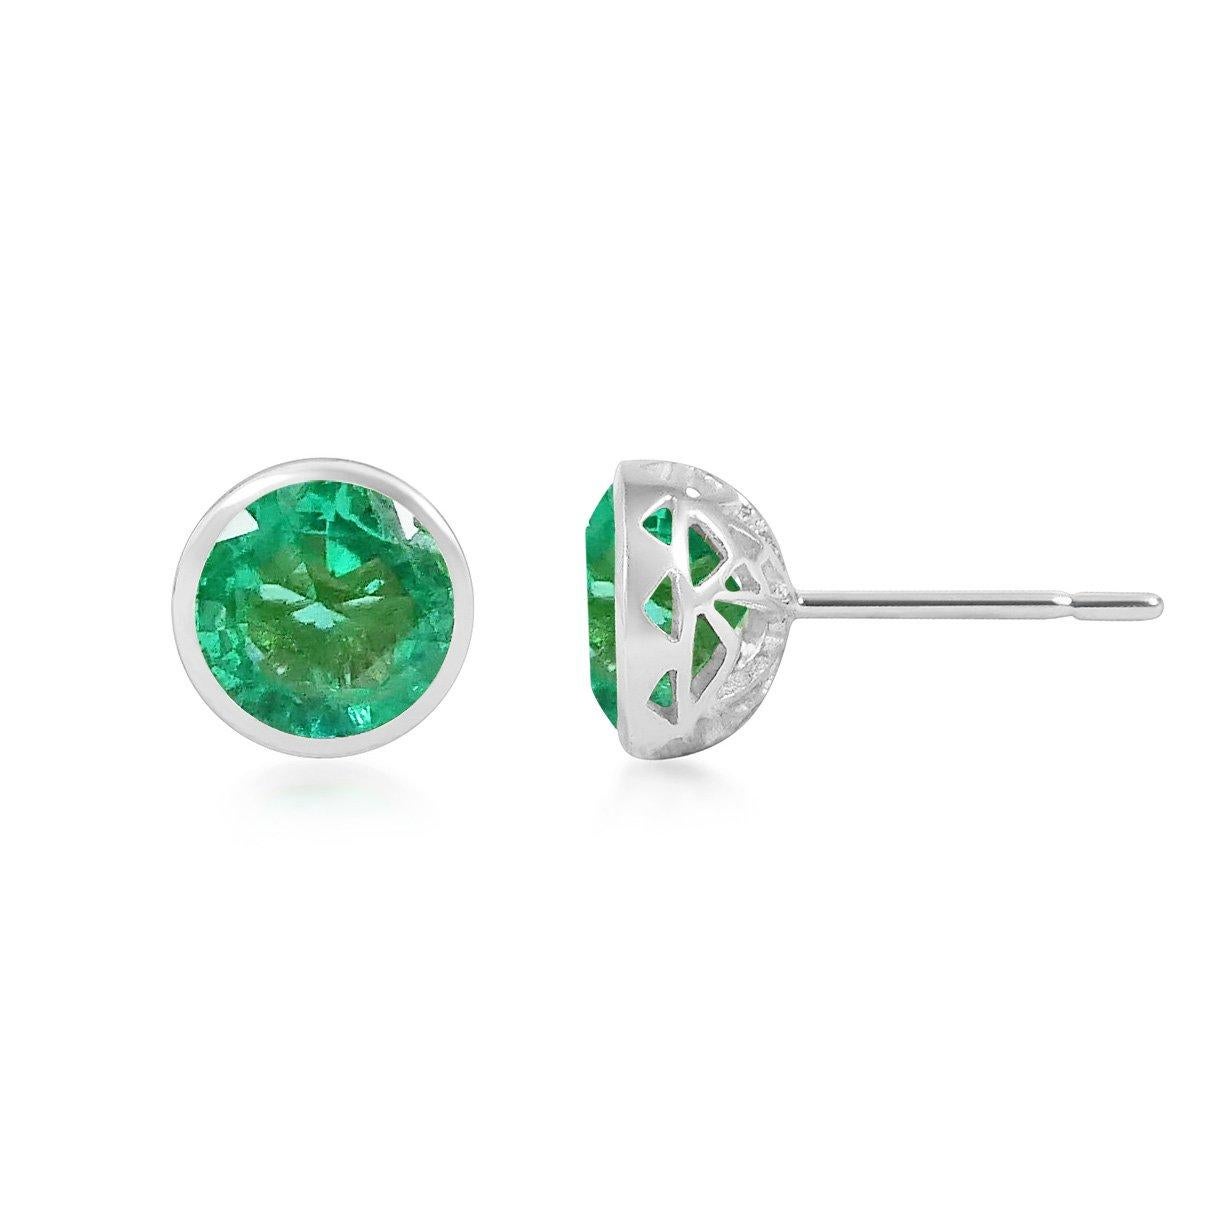 Handcrafted 2.00 Carats Emerald 18 Karat White Gold Stud Earrings. The 8mm natural stones are set in our iconic hand pierced gold lace to let the light through our precious and fine stones our earrings are the perfect everyday wear.

Emeralds are